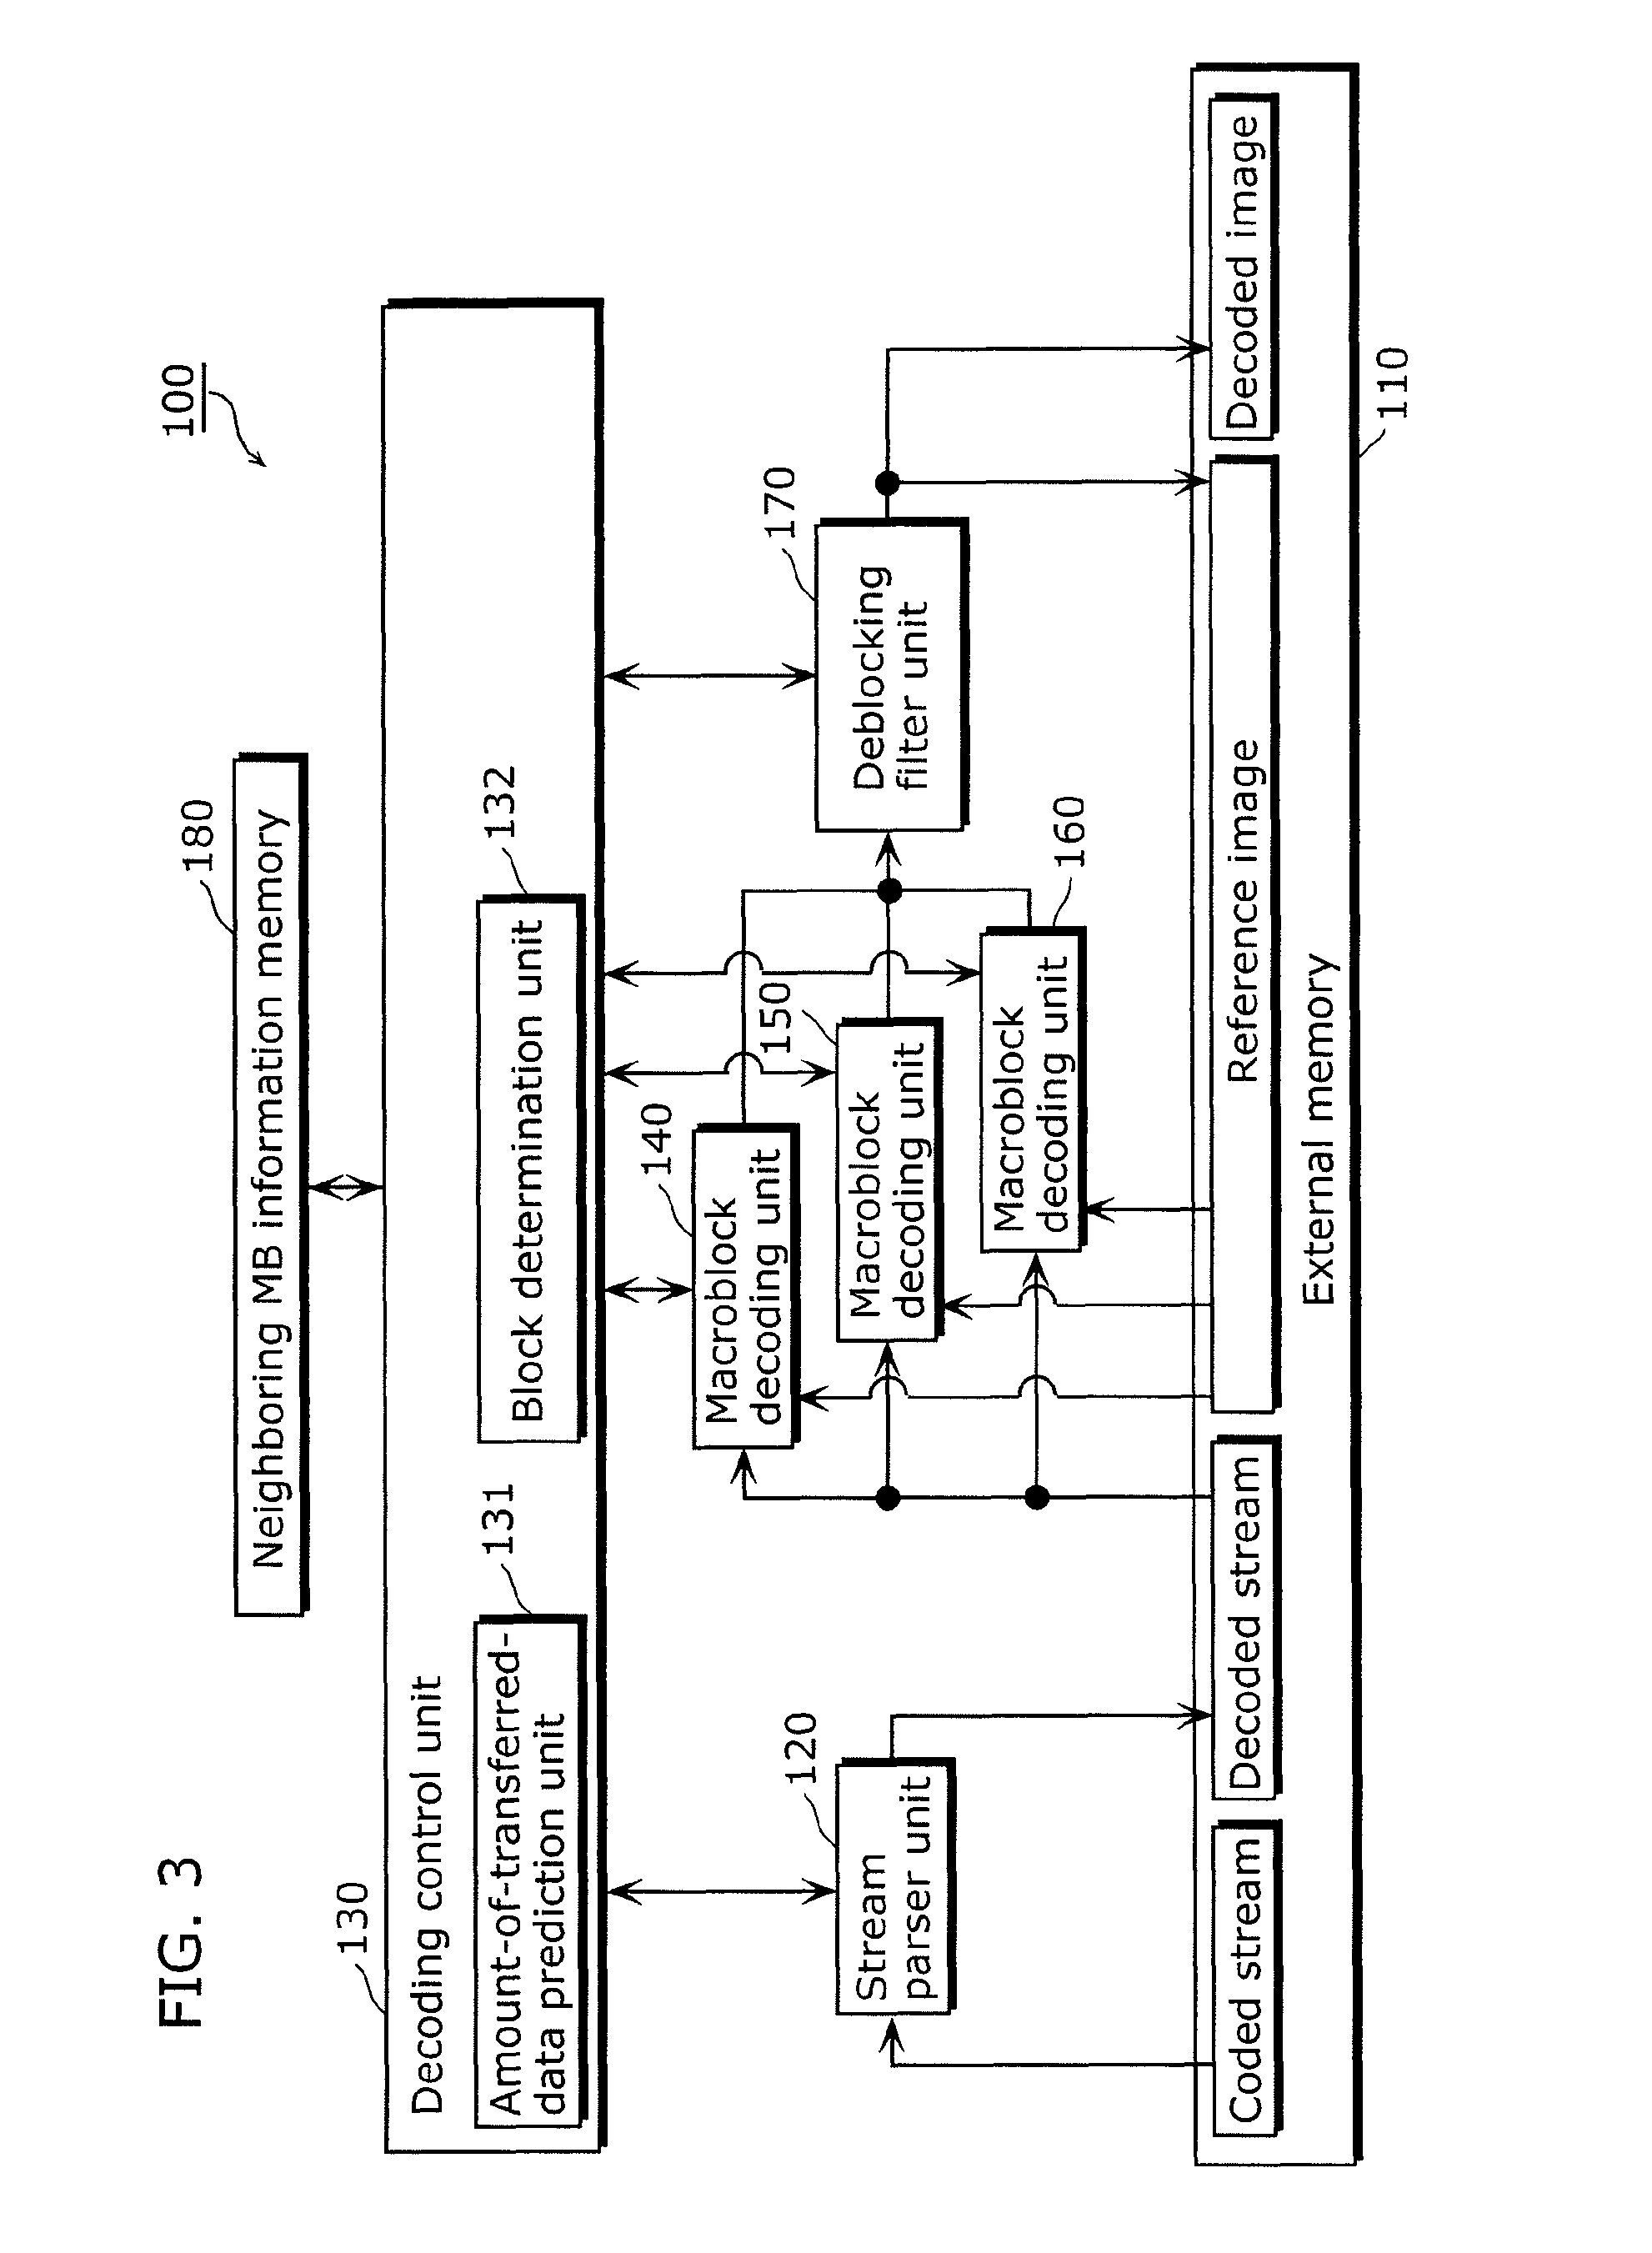 Image decoding device, image decoding method, integrated circuit, and program for performing parallel decoding of coded image data